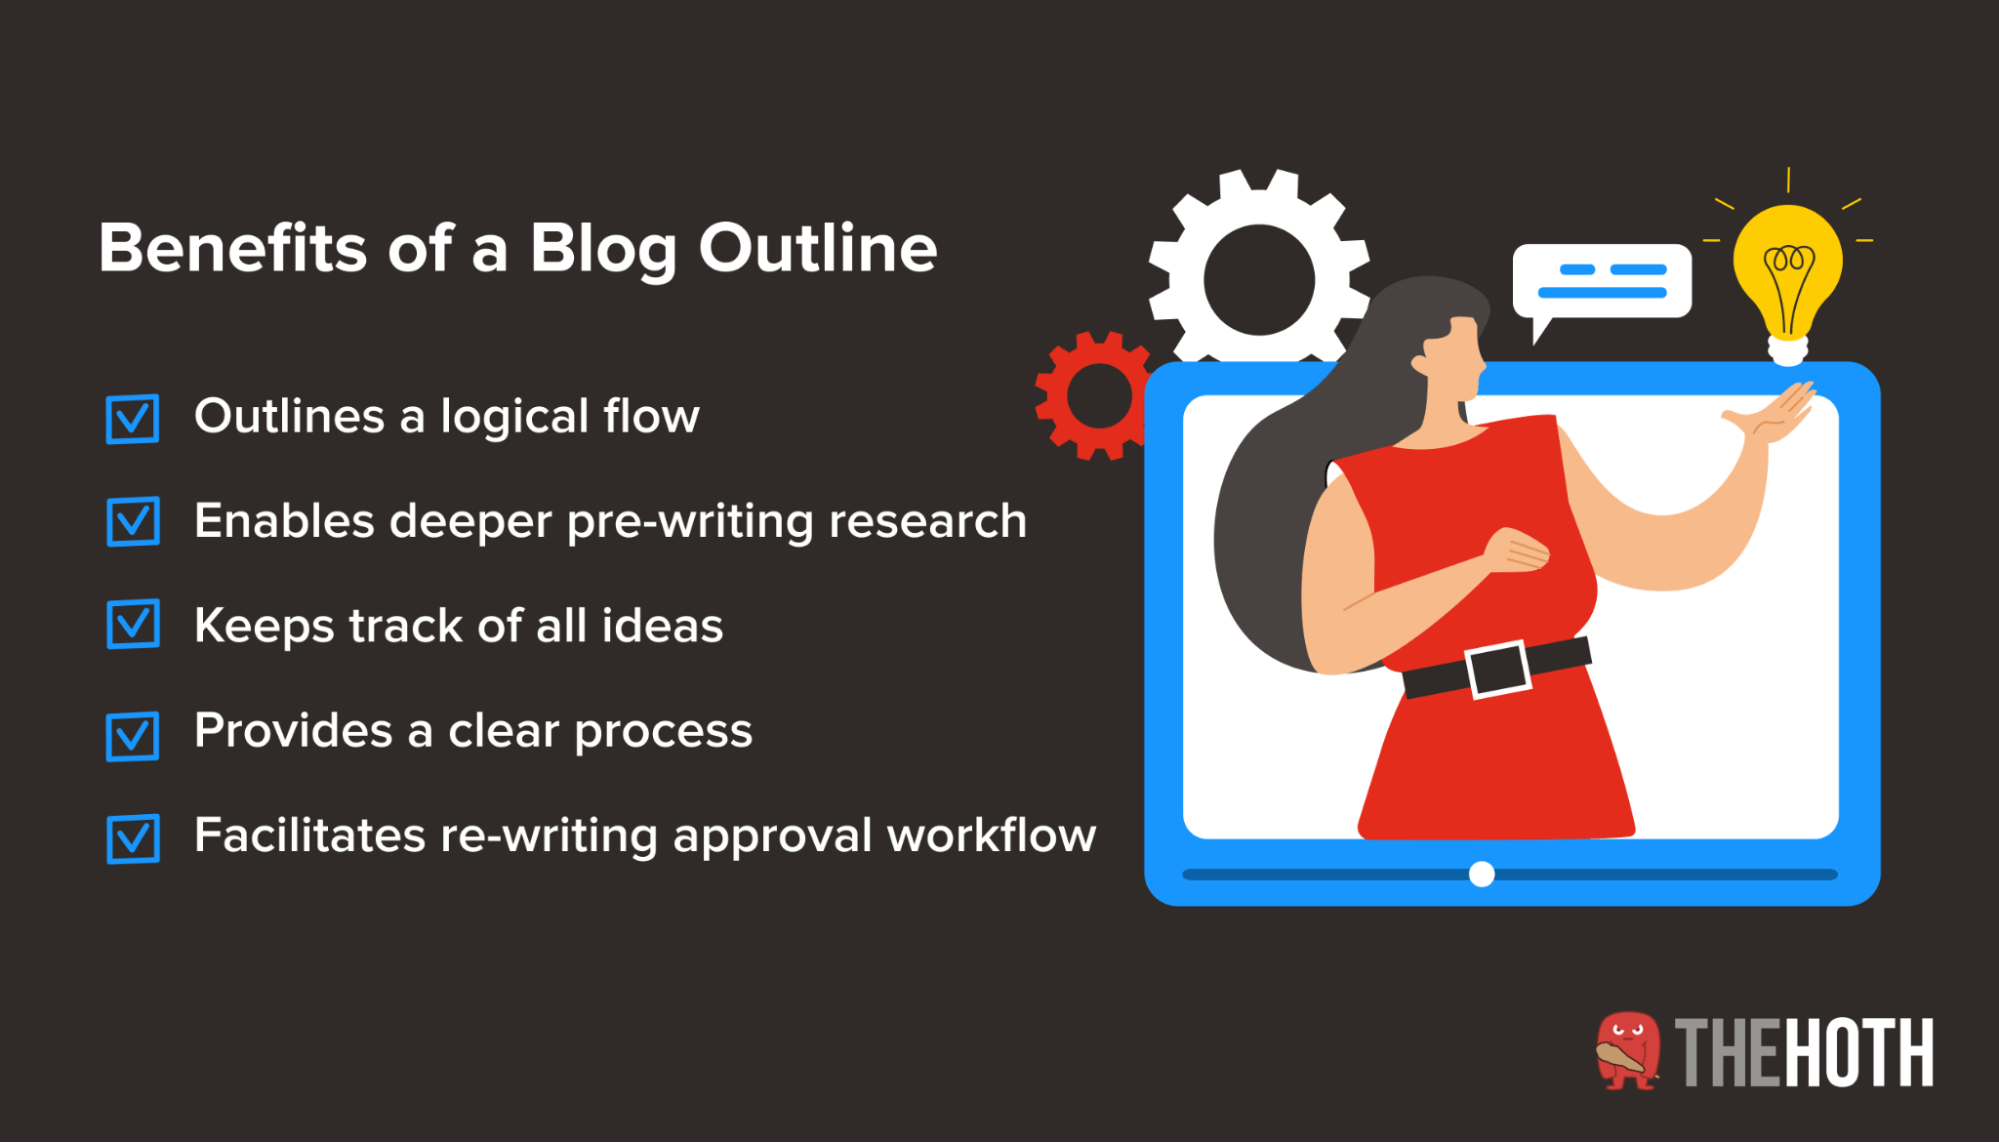 Why use a blog outline